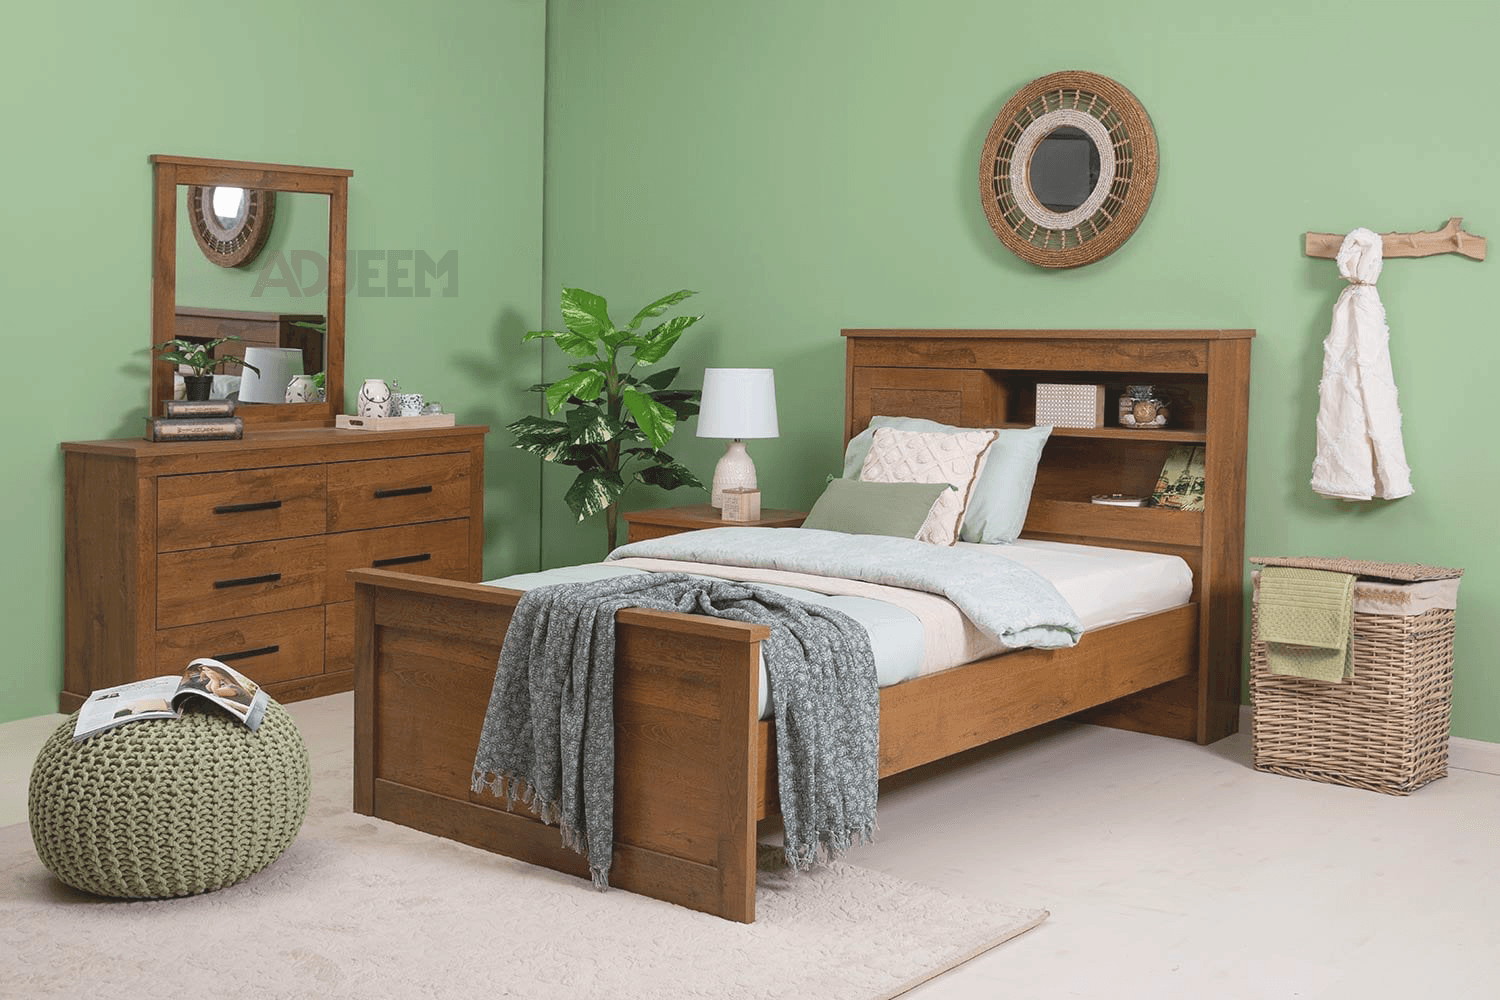 BED SPACE AVIALBALE FOR EXECUTIVE BACHELORS